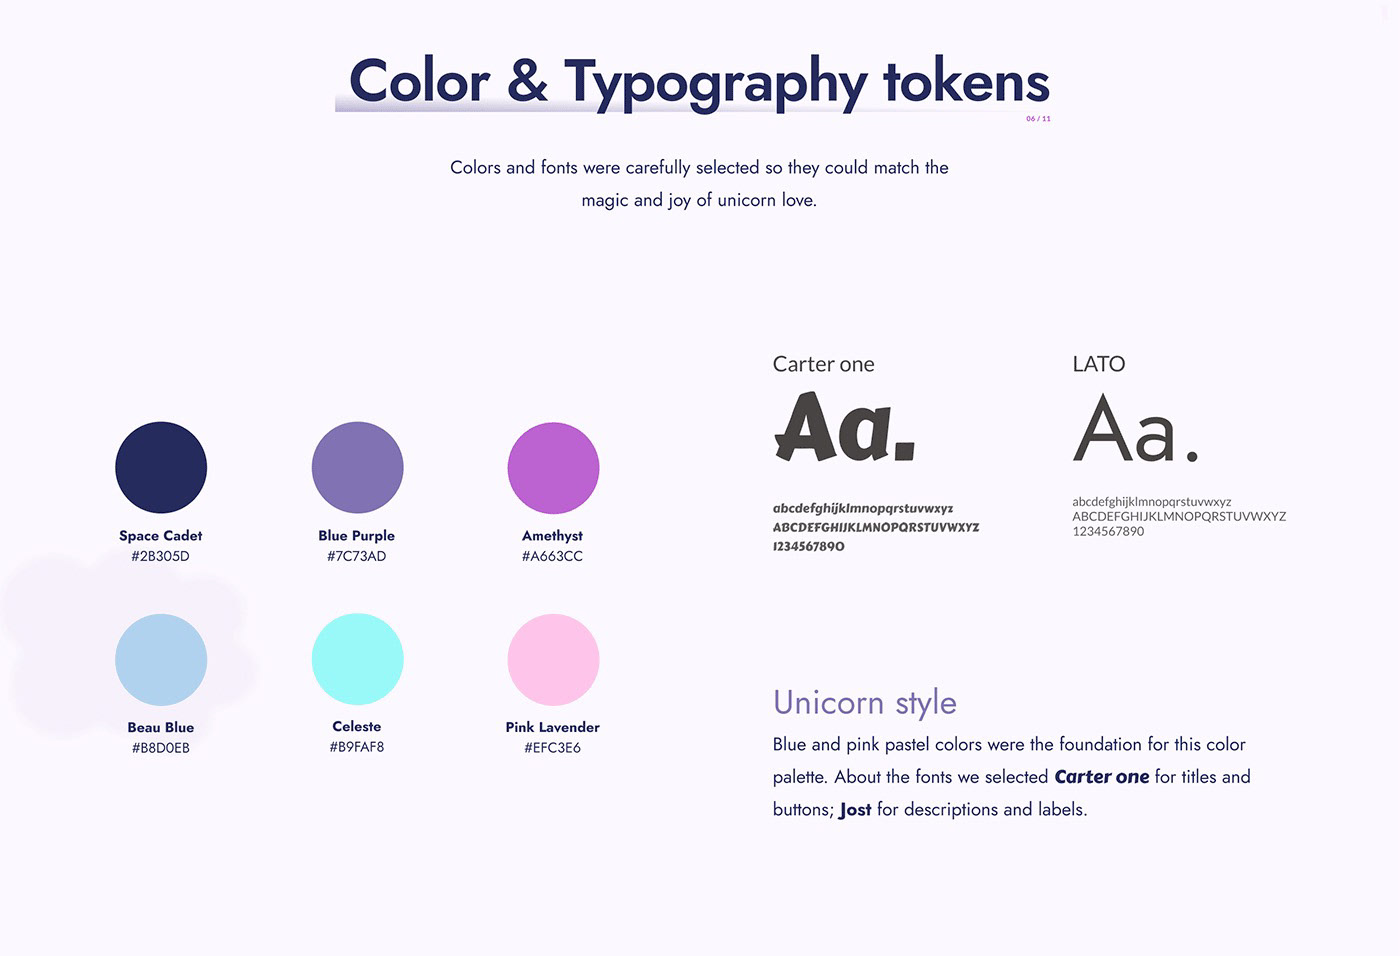 Colors & Typography tokens